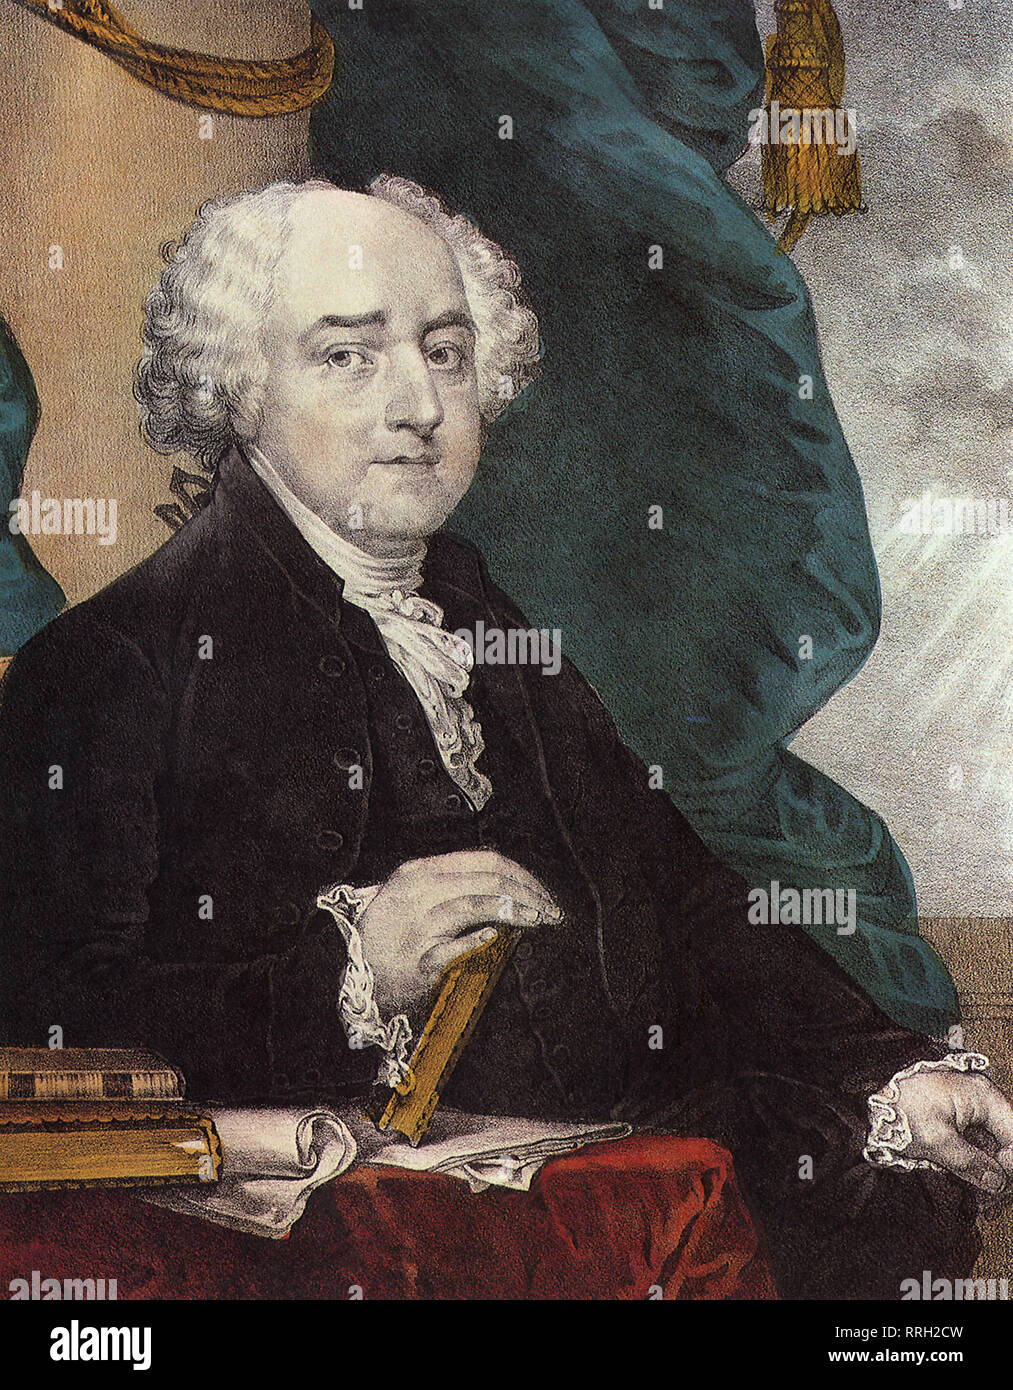 John Adams, Second President of the United States 1797. Stock Photo